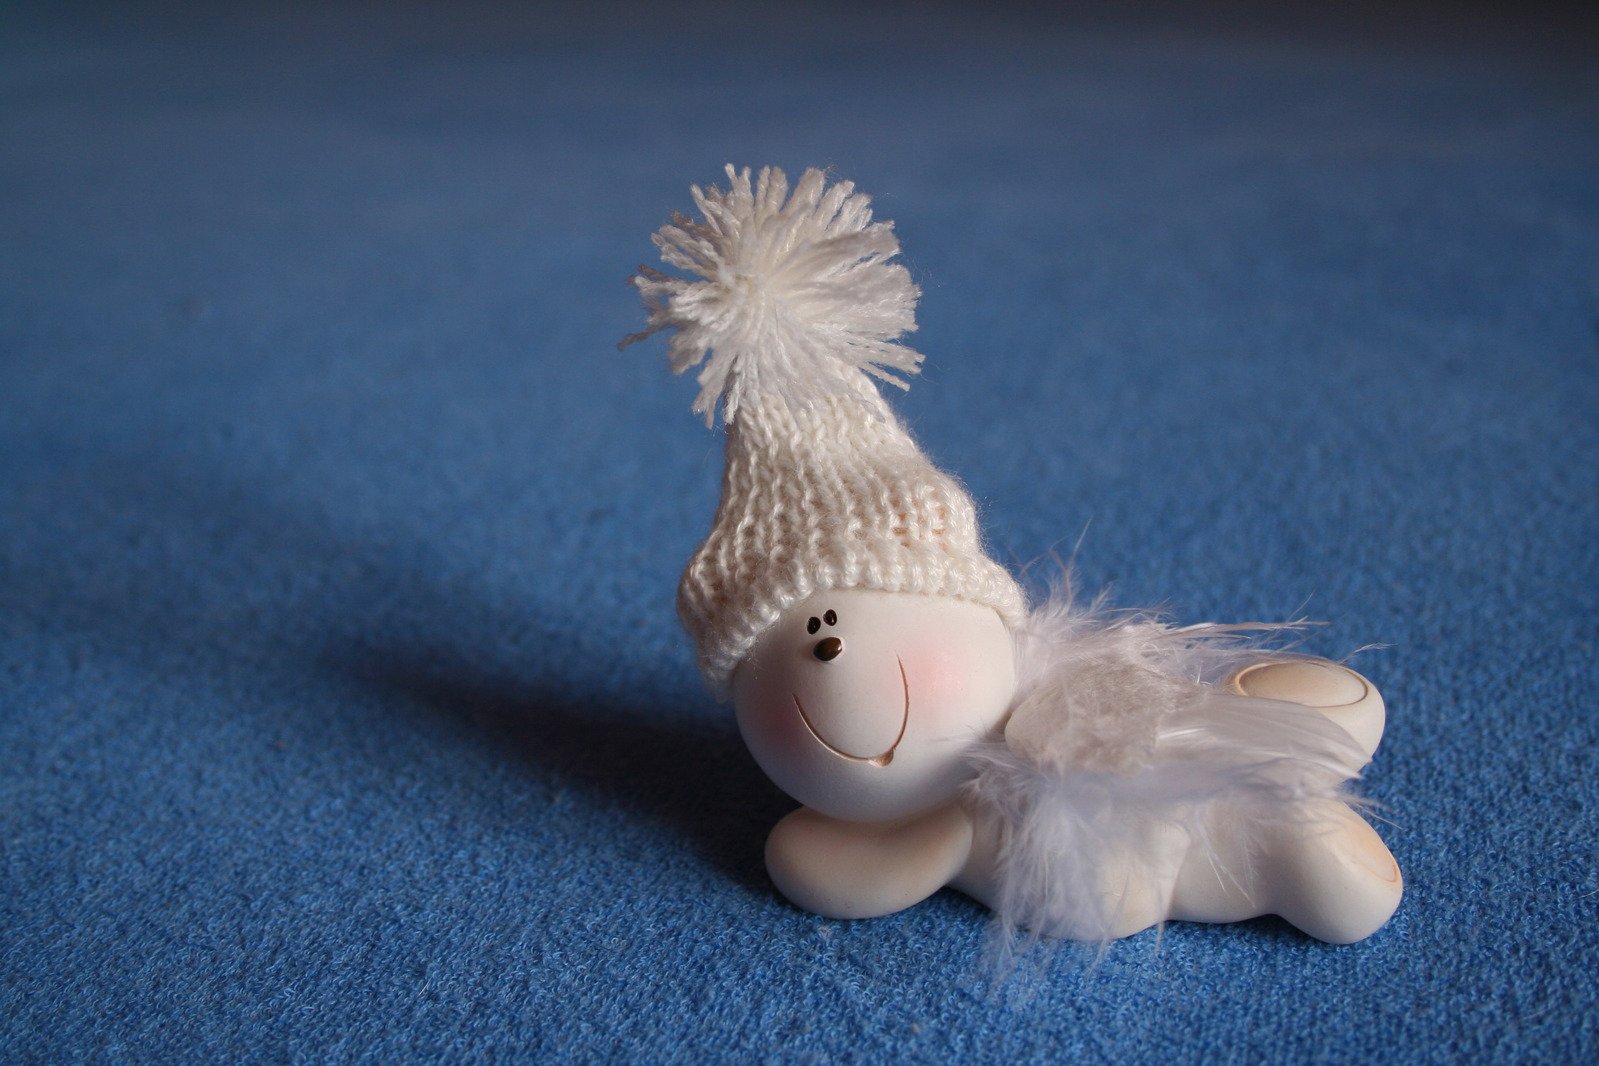 the stuffed animal has white fur and white hat